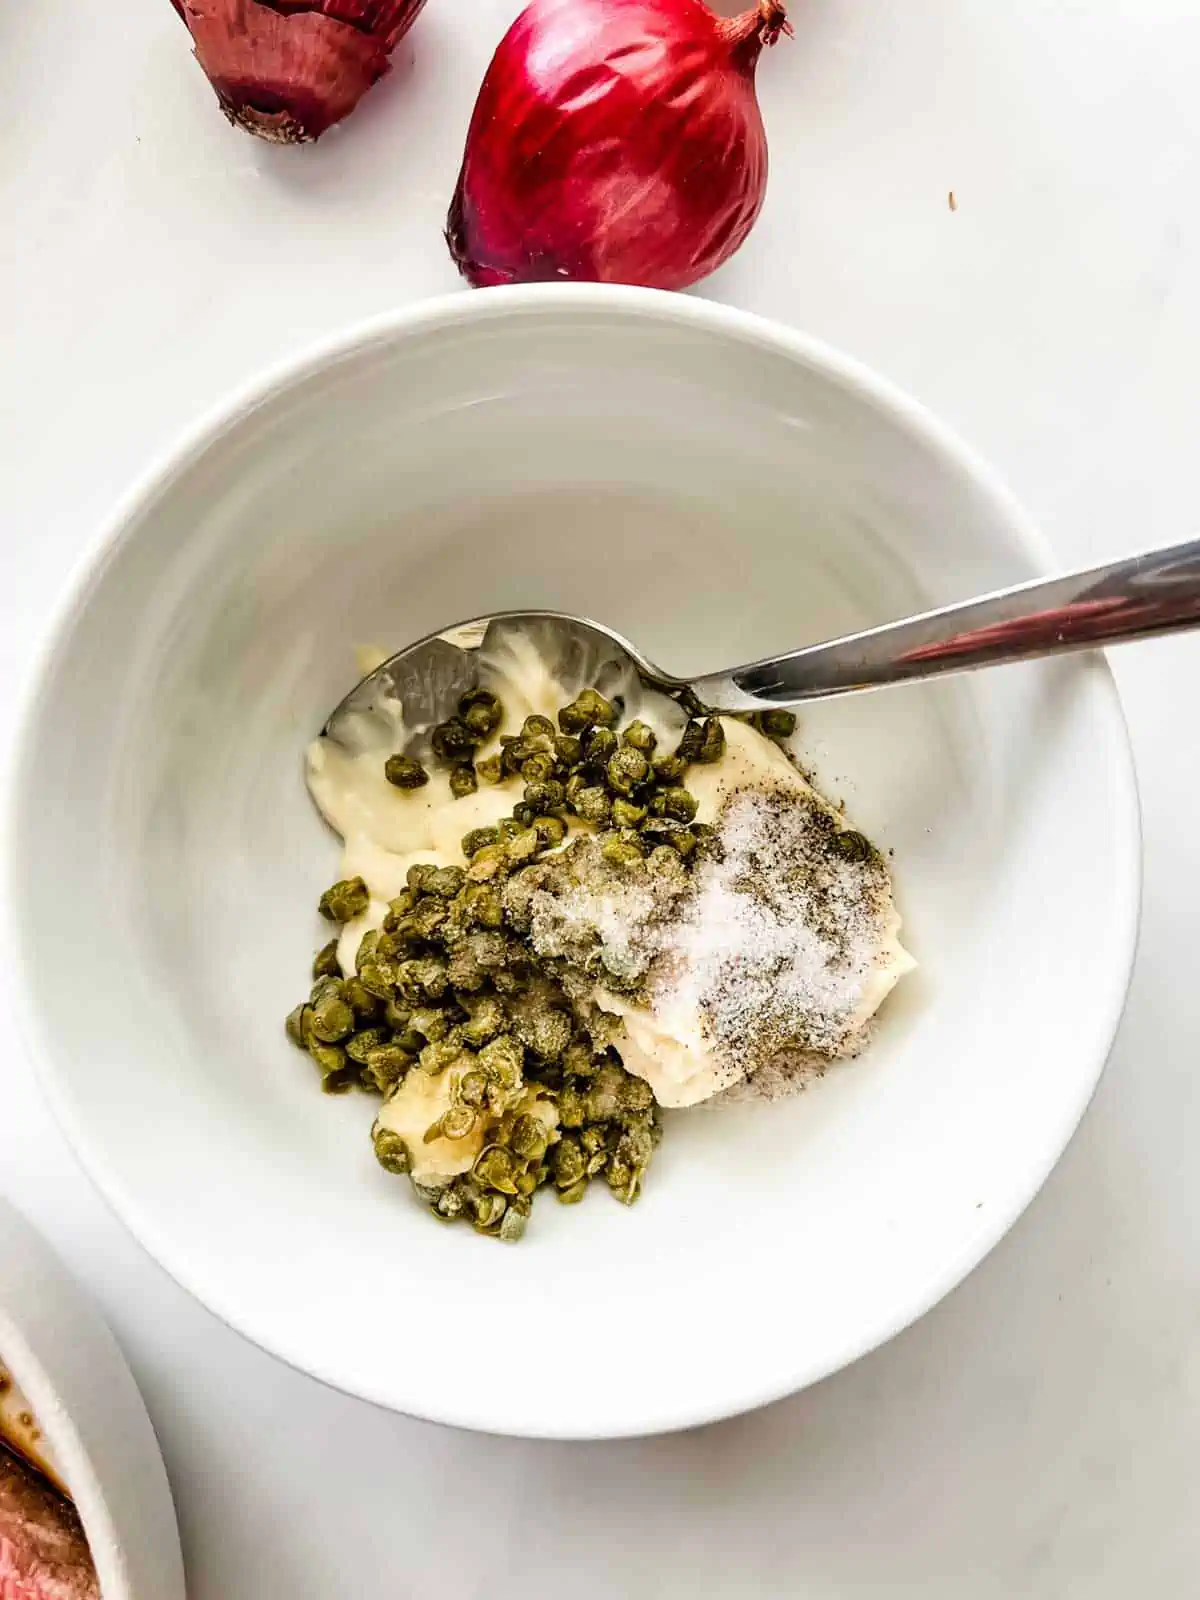 Mayonaise, capers, and seasonings in a small white bowl.